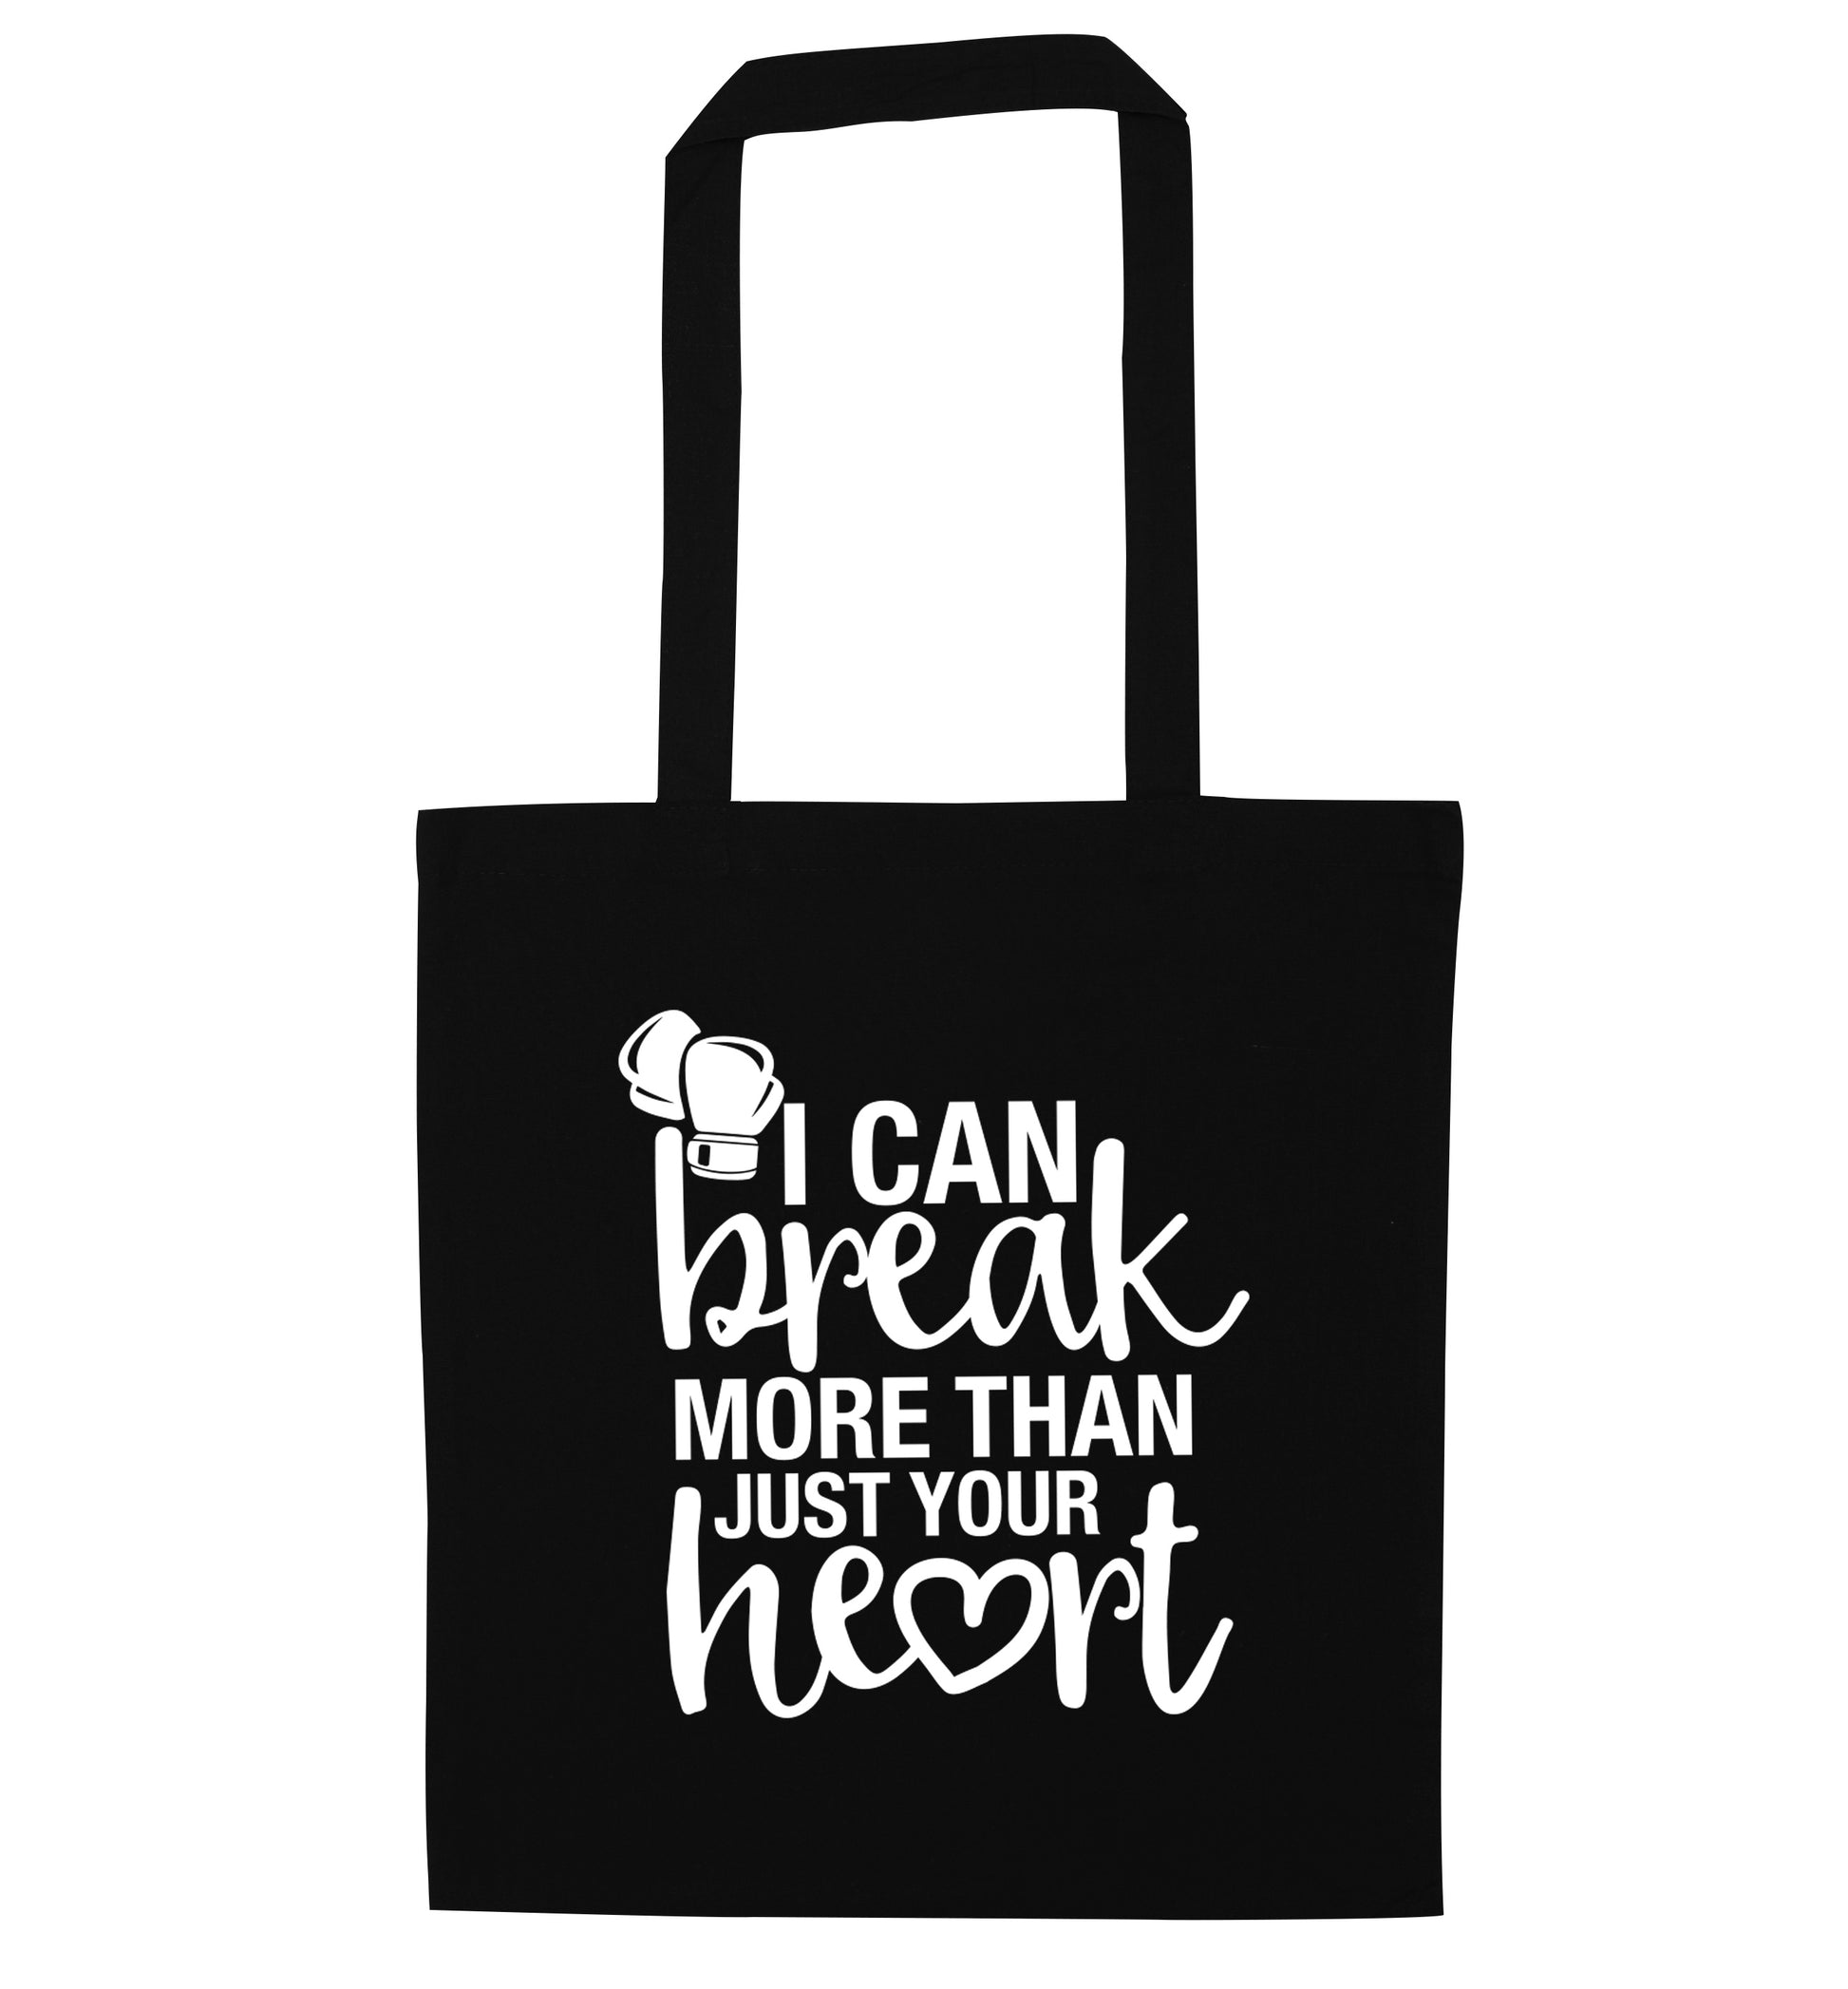 I can break more than just your heart black tote bag